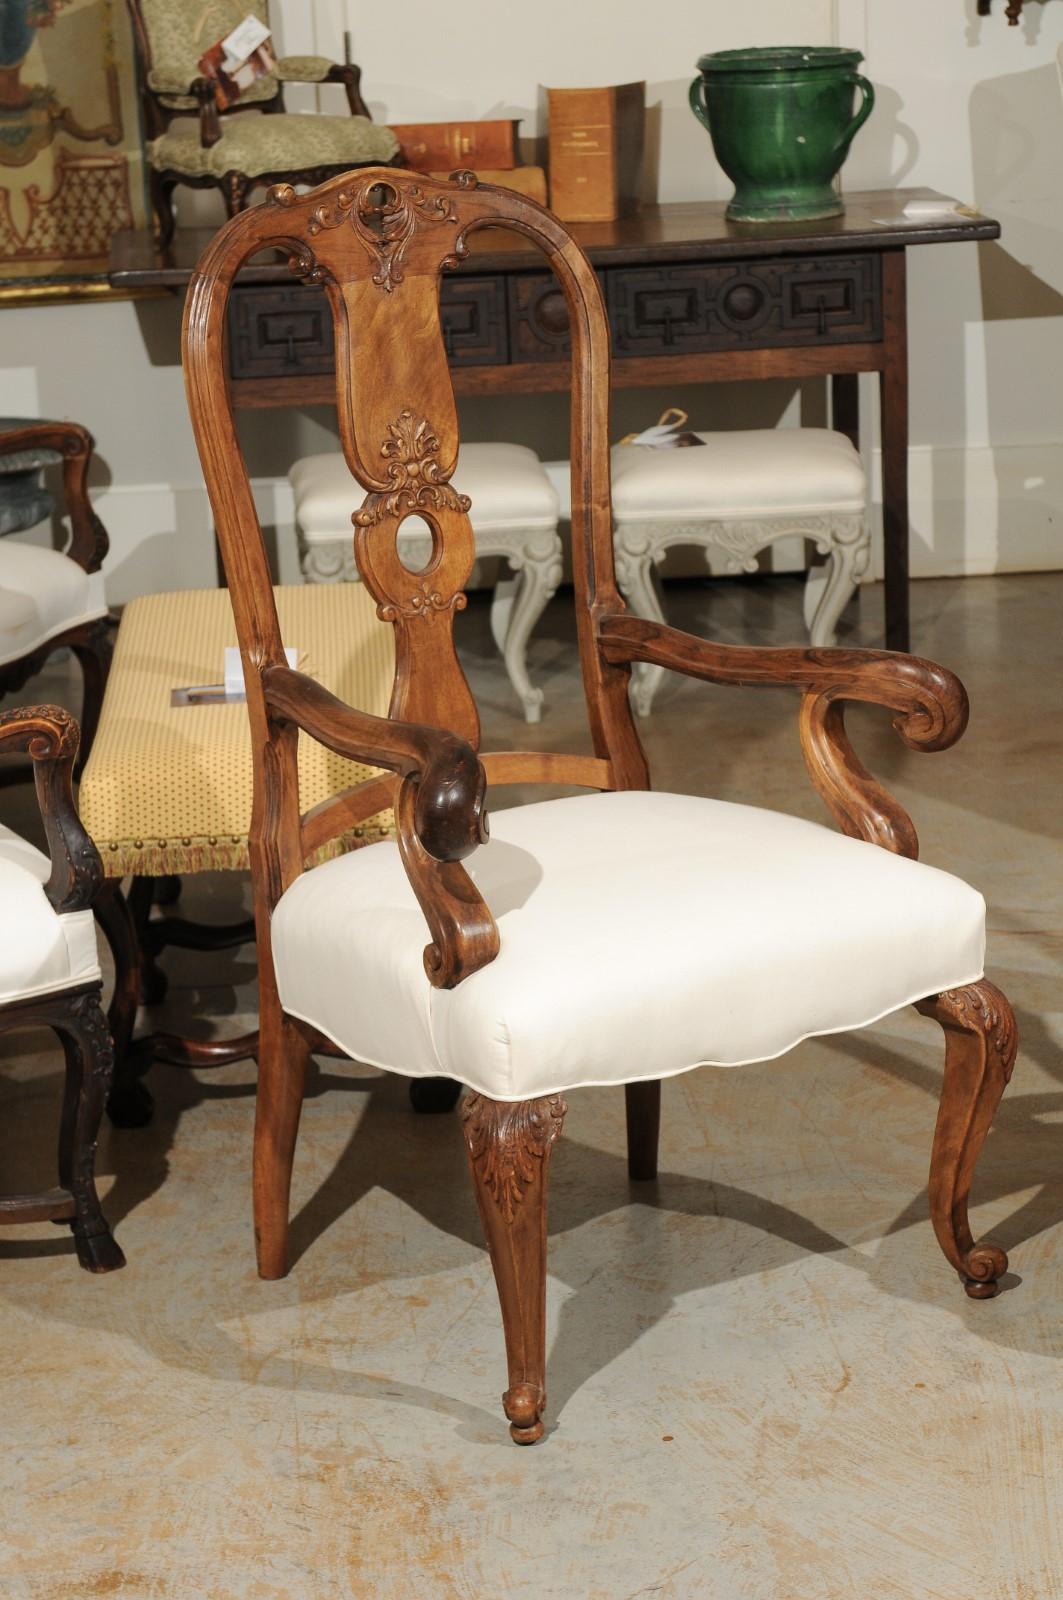 19th century chairs styles